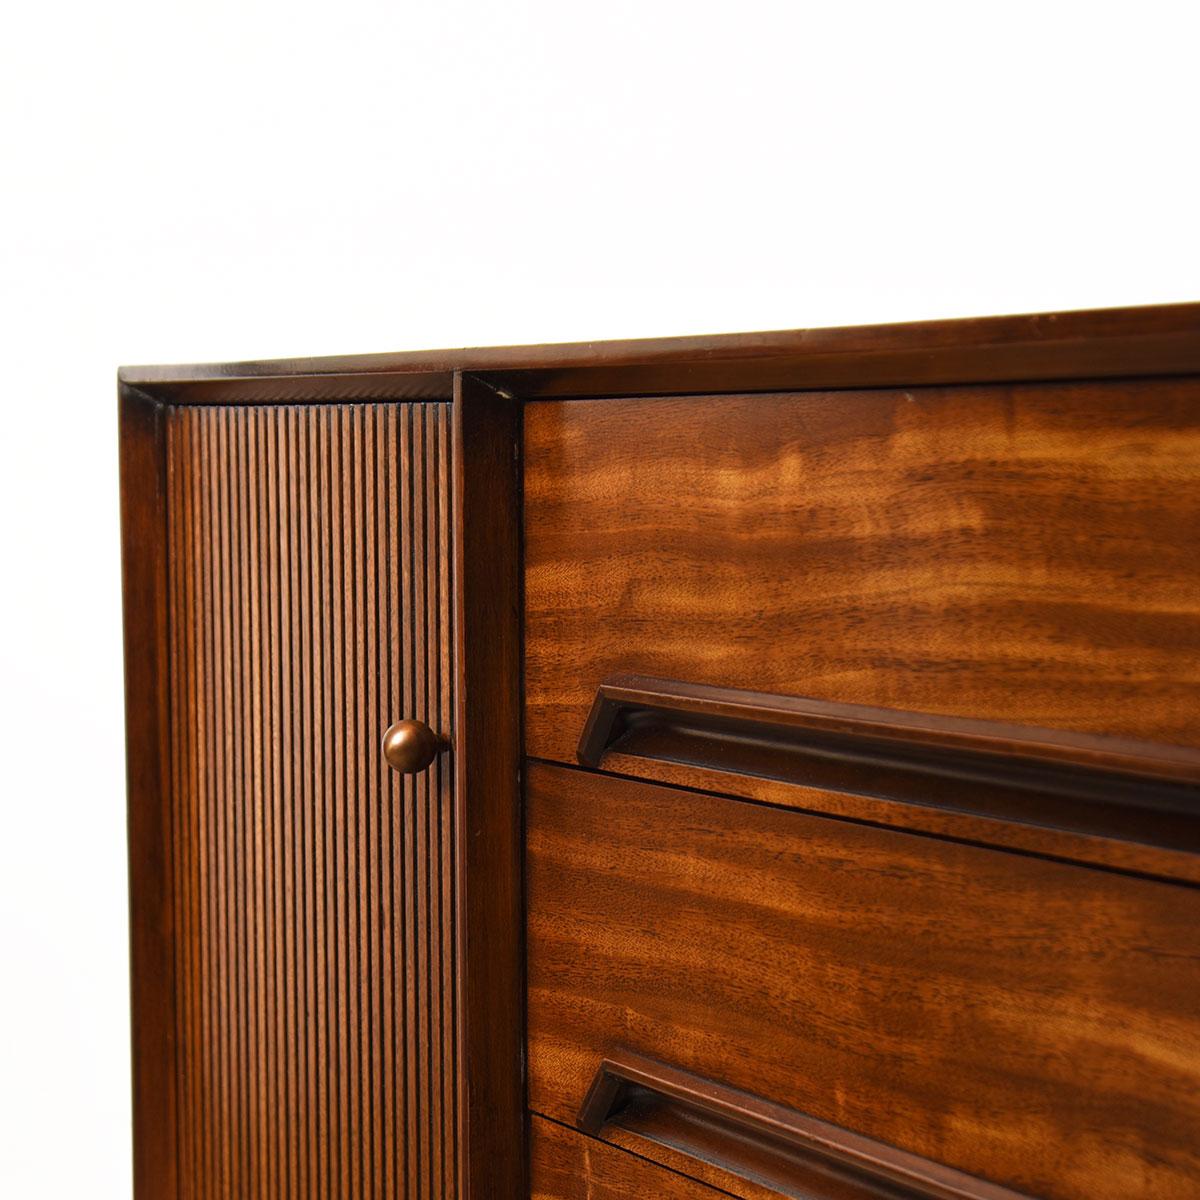 Exotic Mindoro Wood Cabinet by Milo Baughman for Drexel Perspective, 1951 For Sale 1